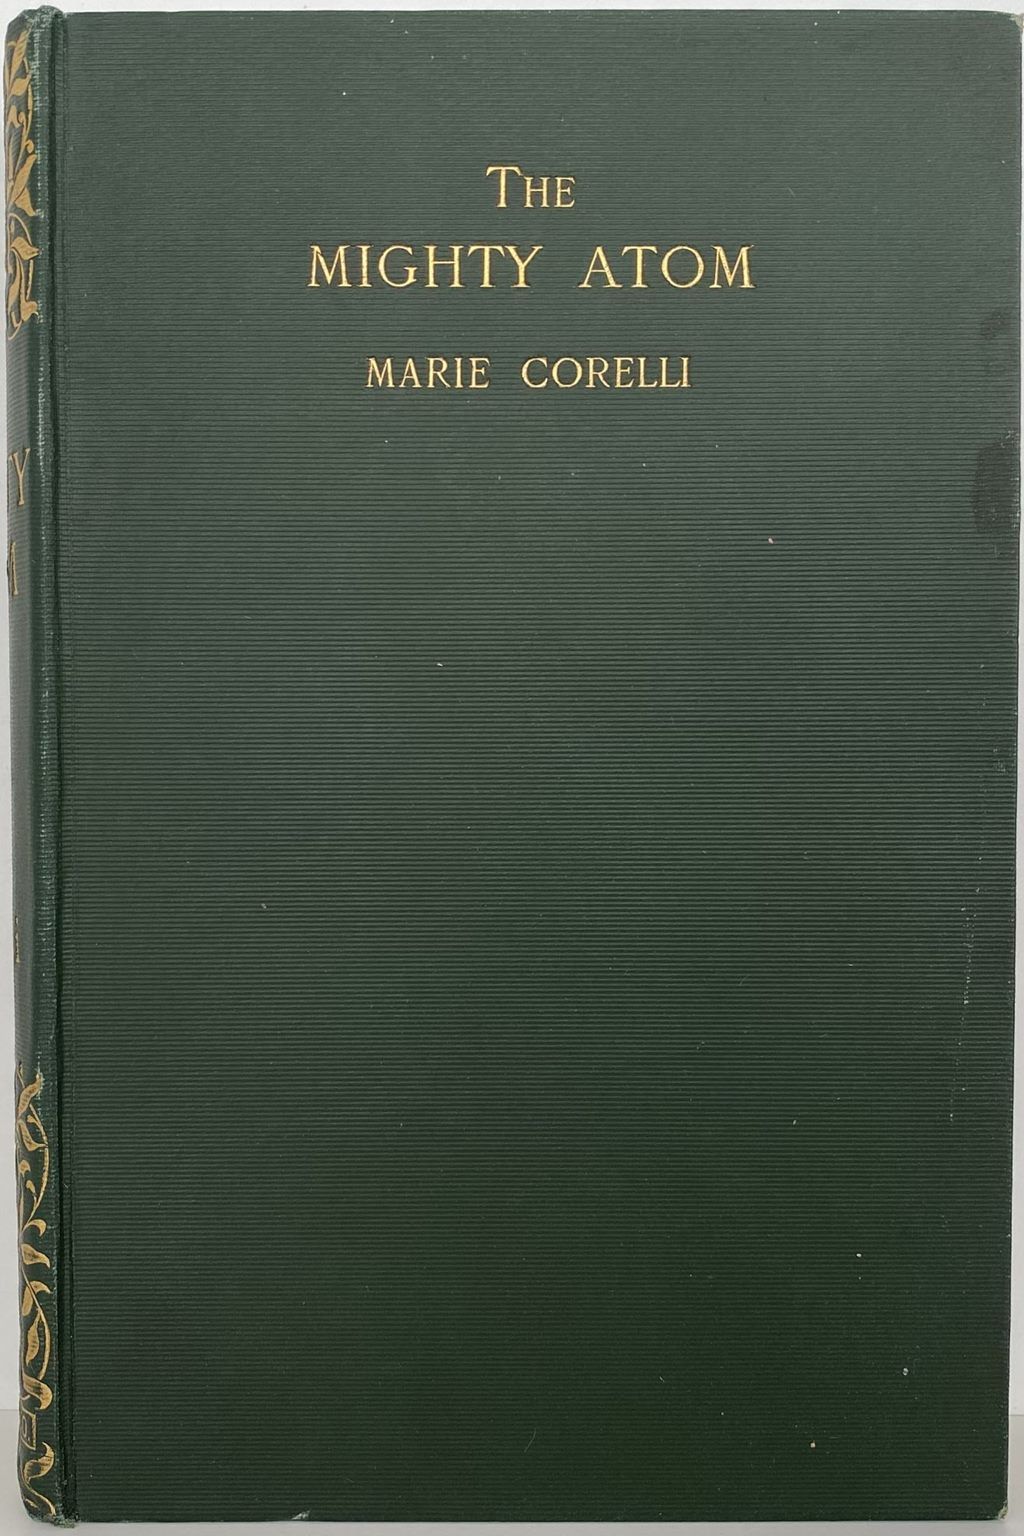 THE MIGHTY ATOM